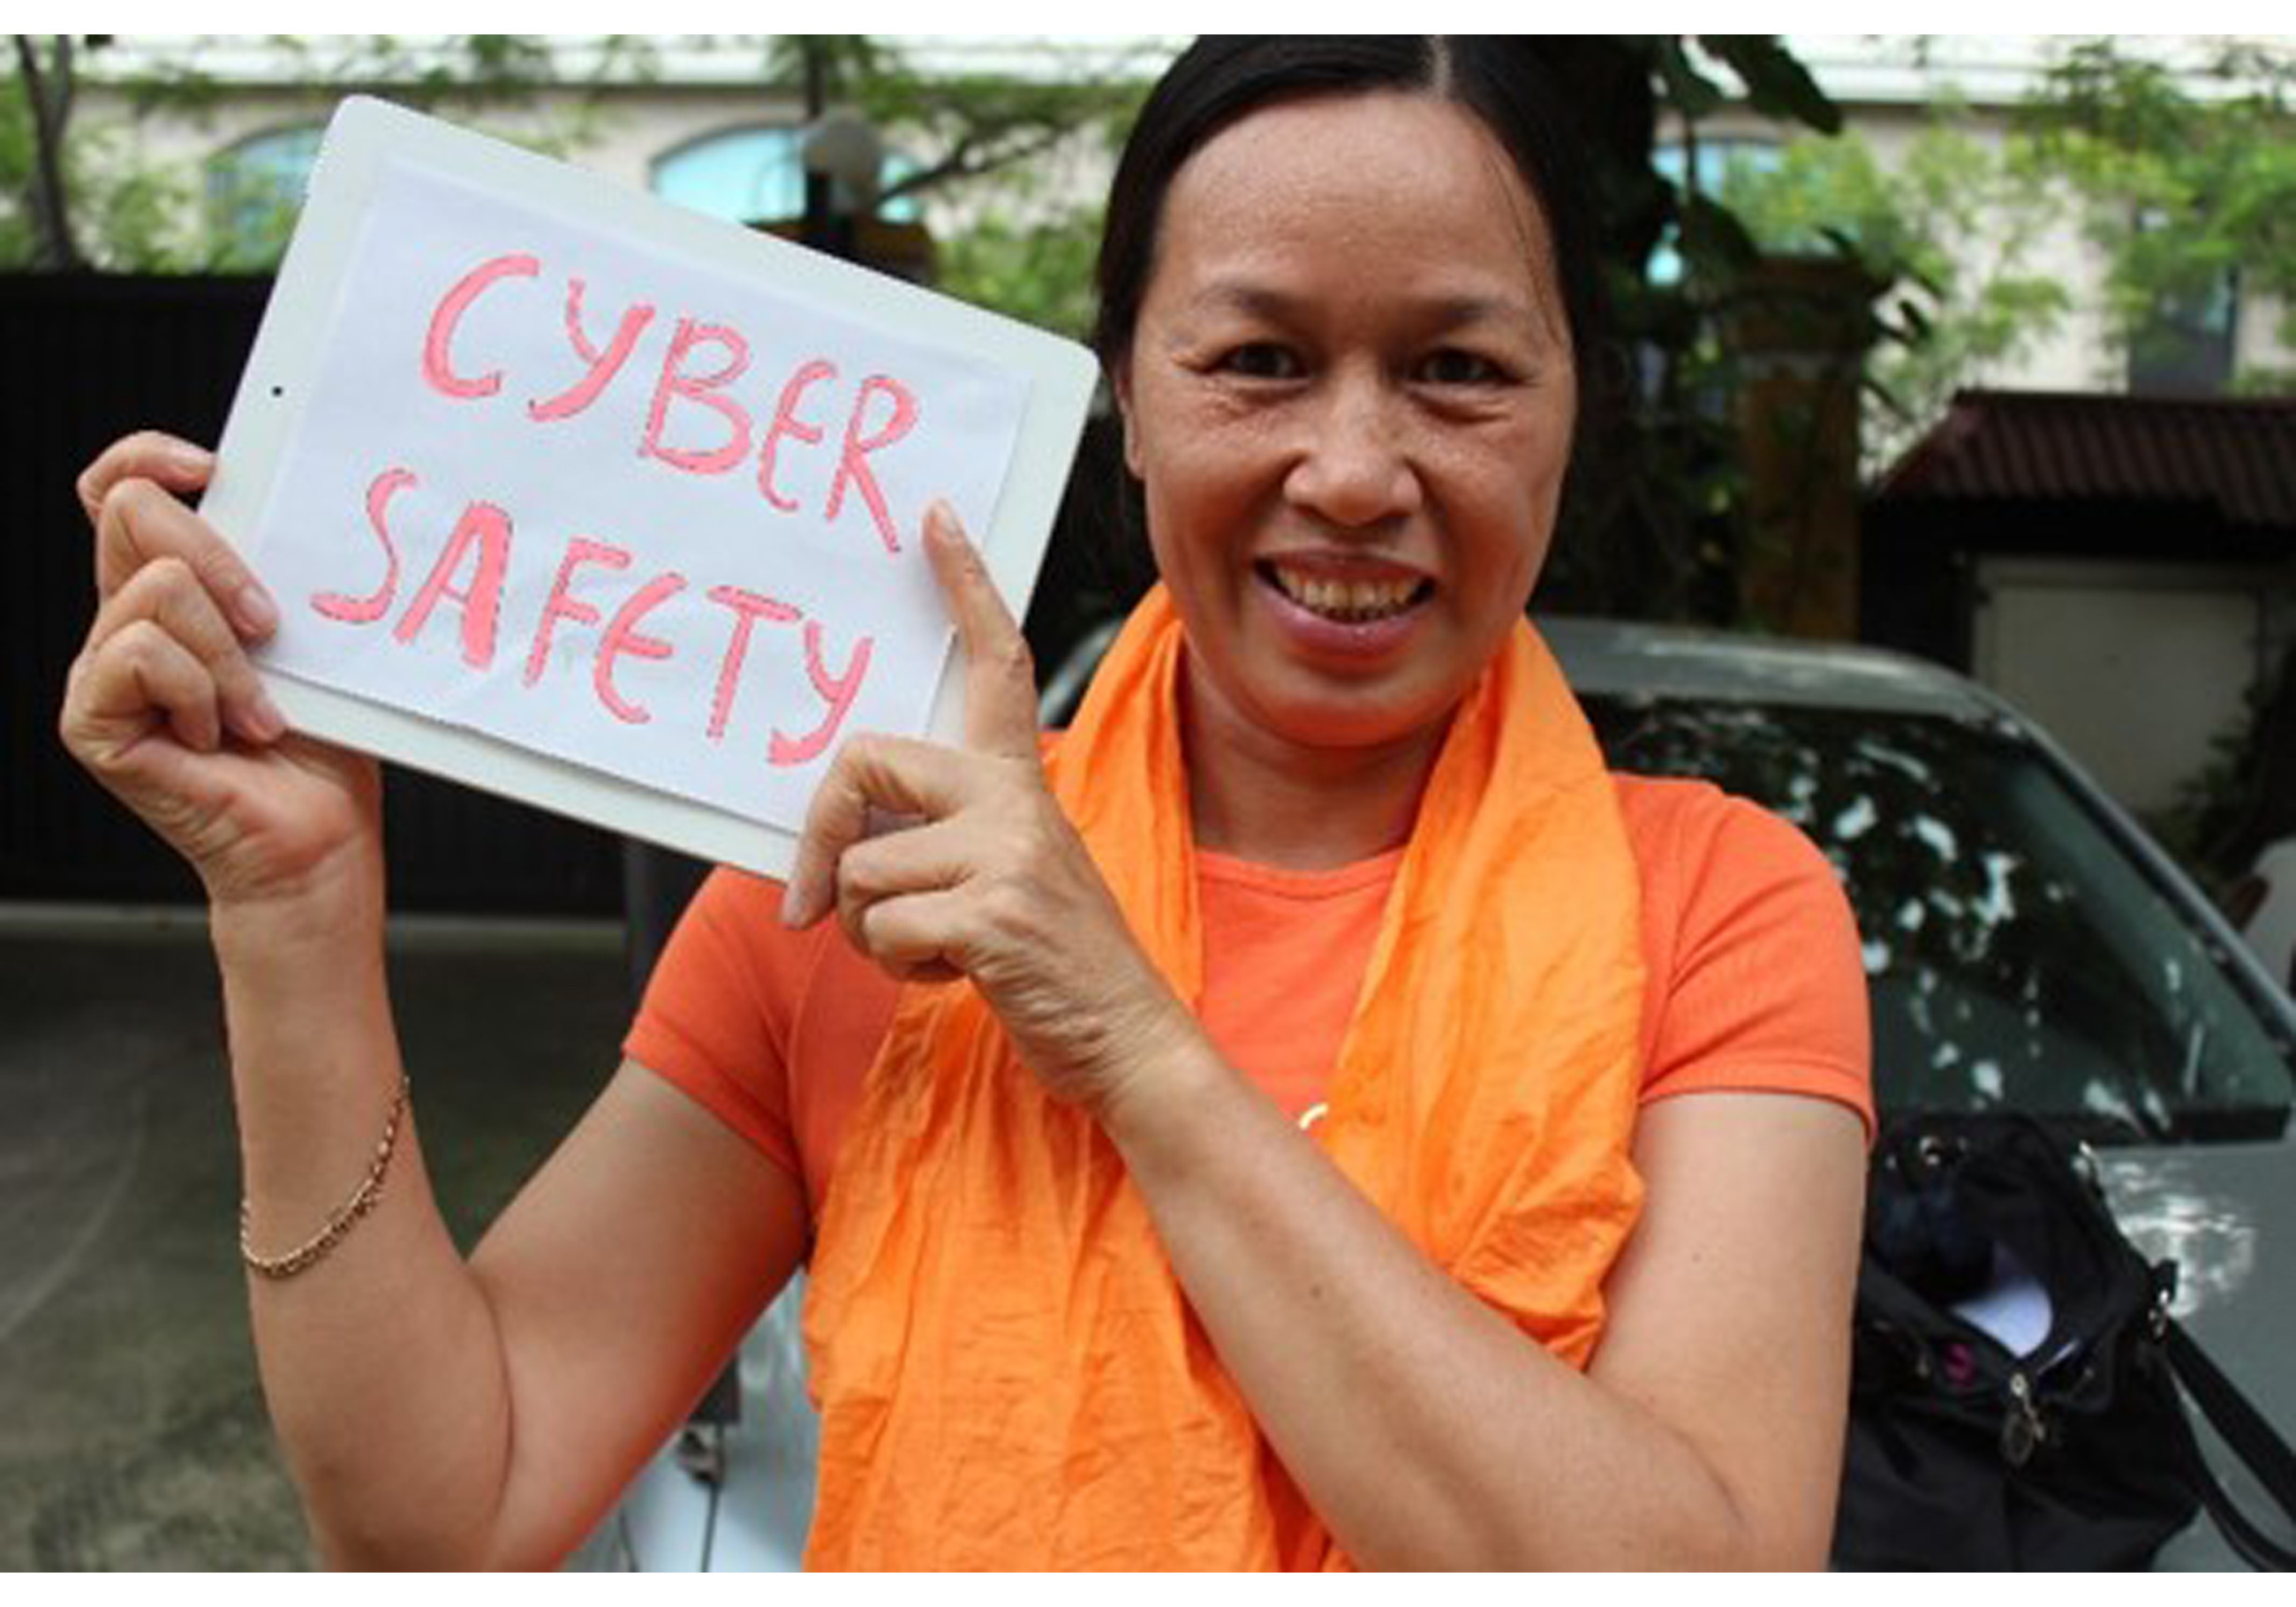 UN Special – Feature on UNICC’s Cyber Security Programme